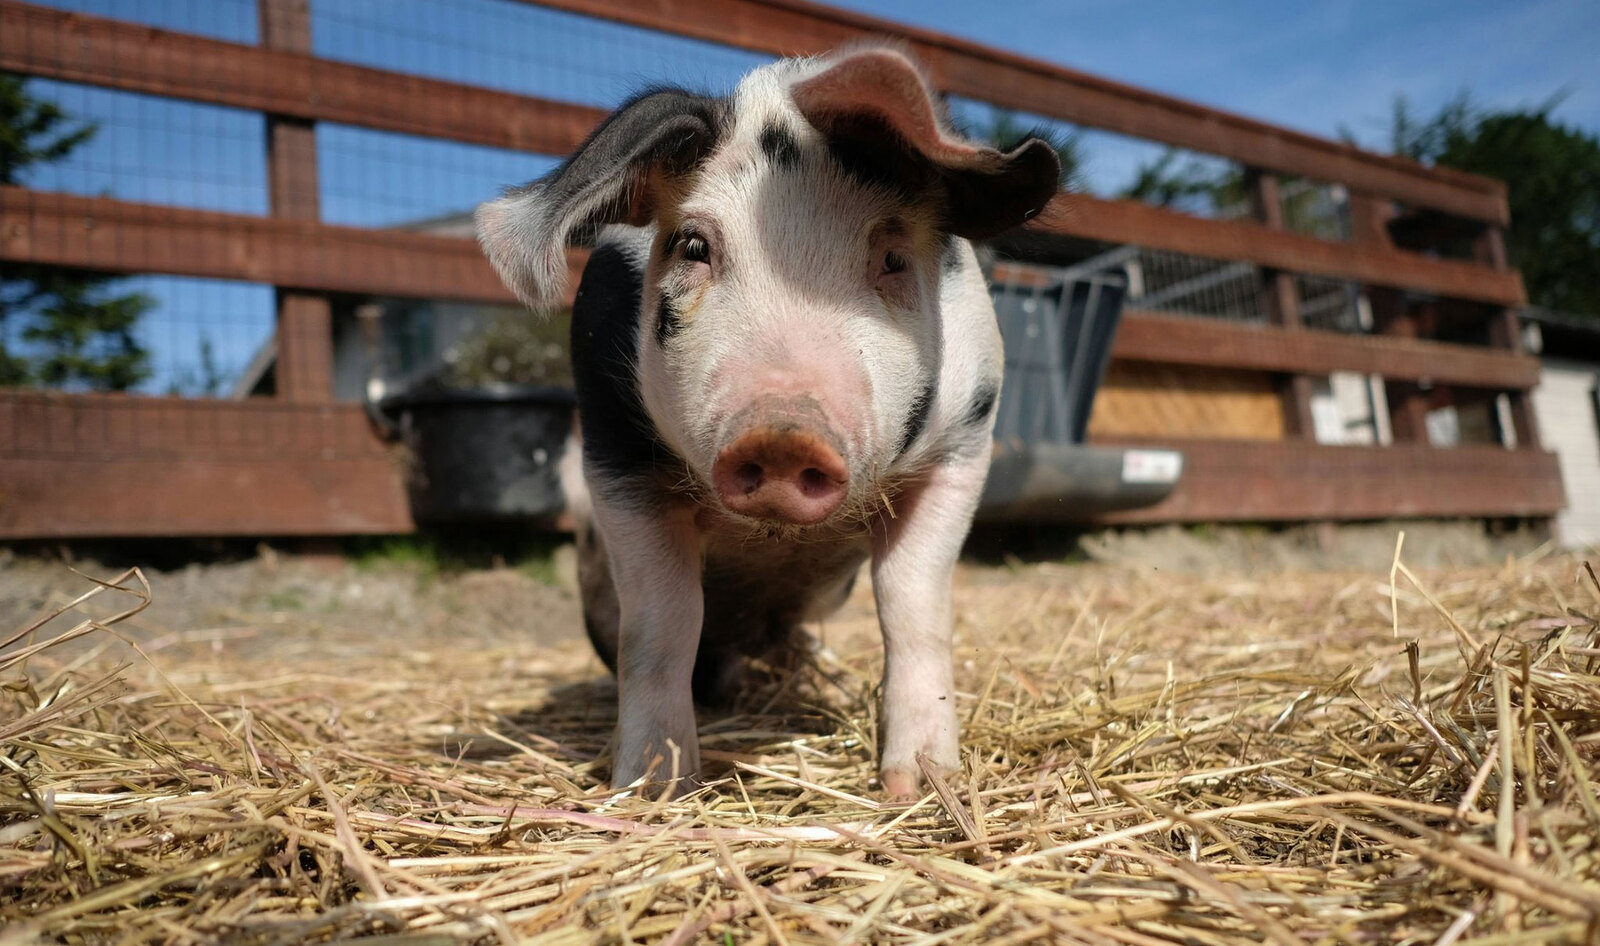 You Can Now Have a Zoom Meeting With Rescued Farmed Animals | VegNews